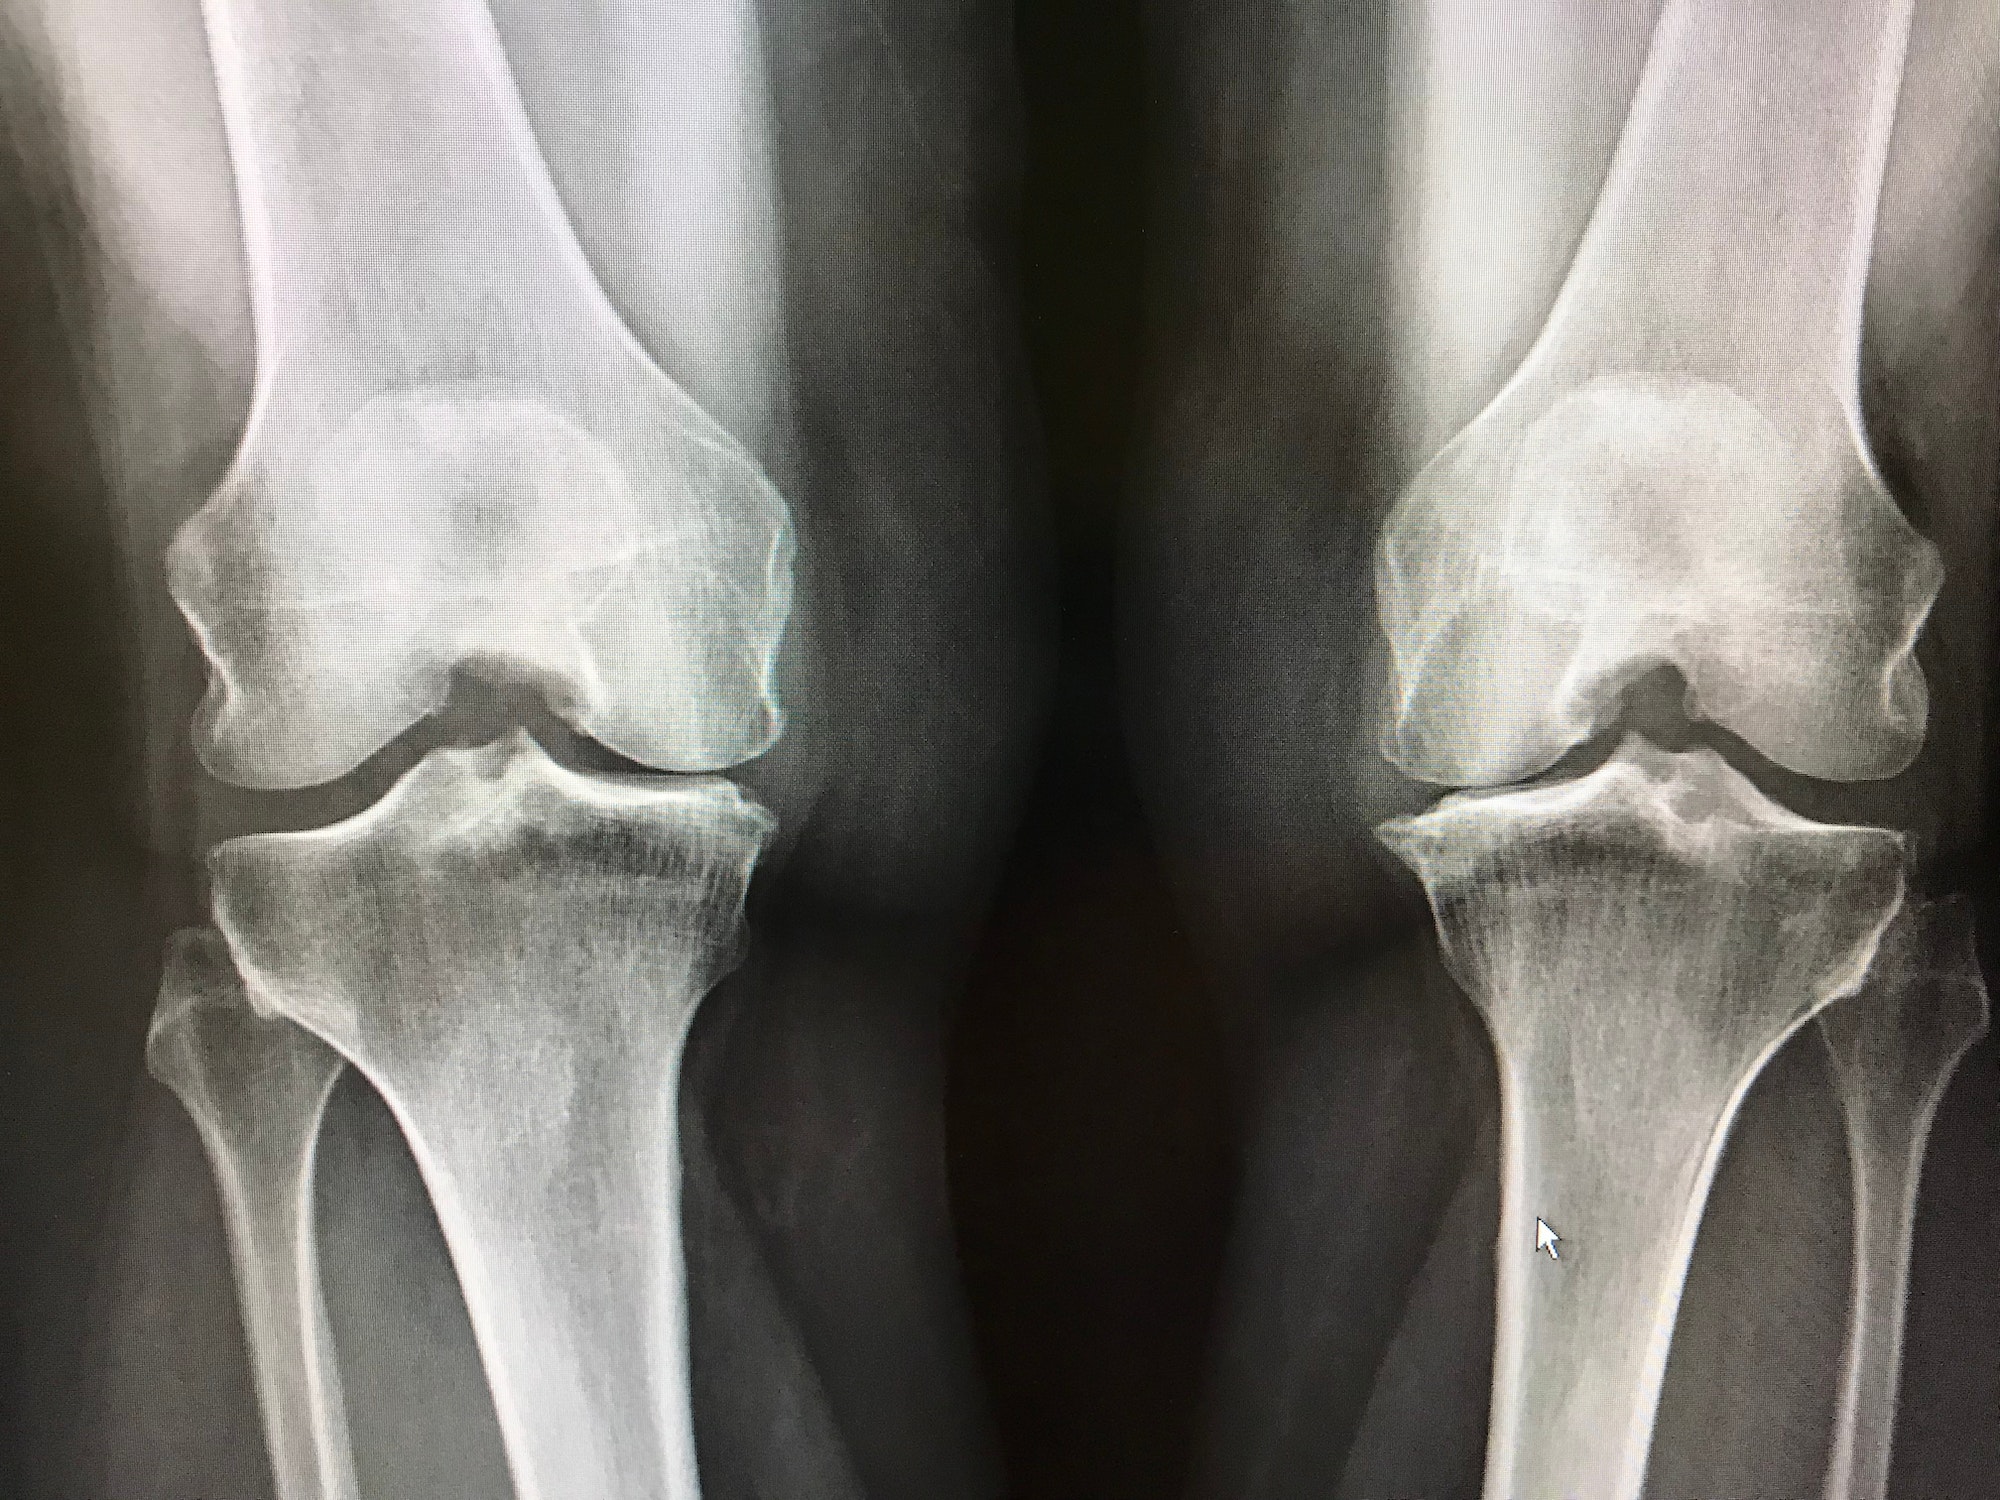 Xray shows narrowing of bones at the knees, cartilage loss, Spurs and calluses with osteoarthritis